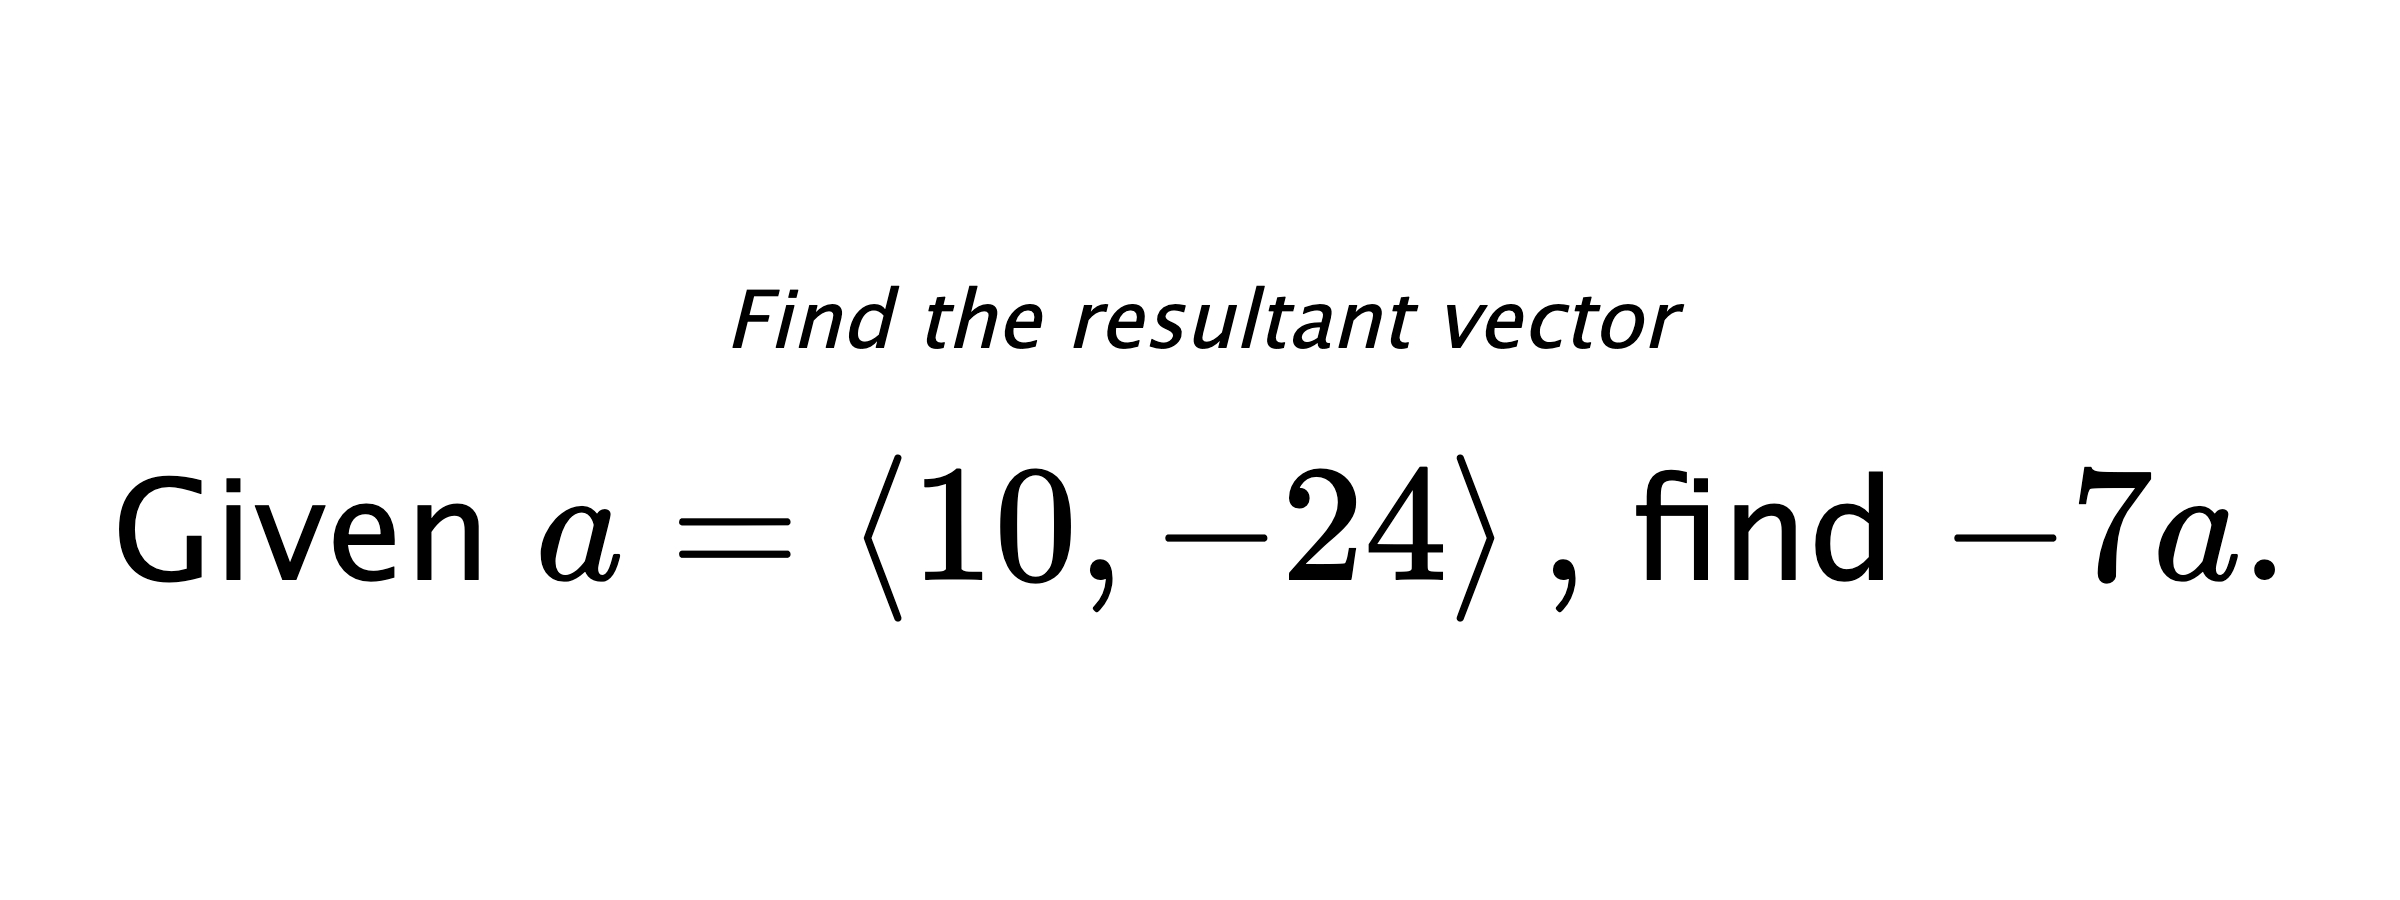 Find the resultant vector Given $ a = \left< 10,-24 \right> ,$ find $ -7a .$